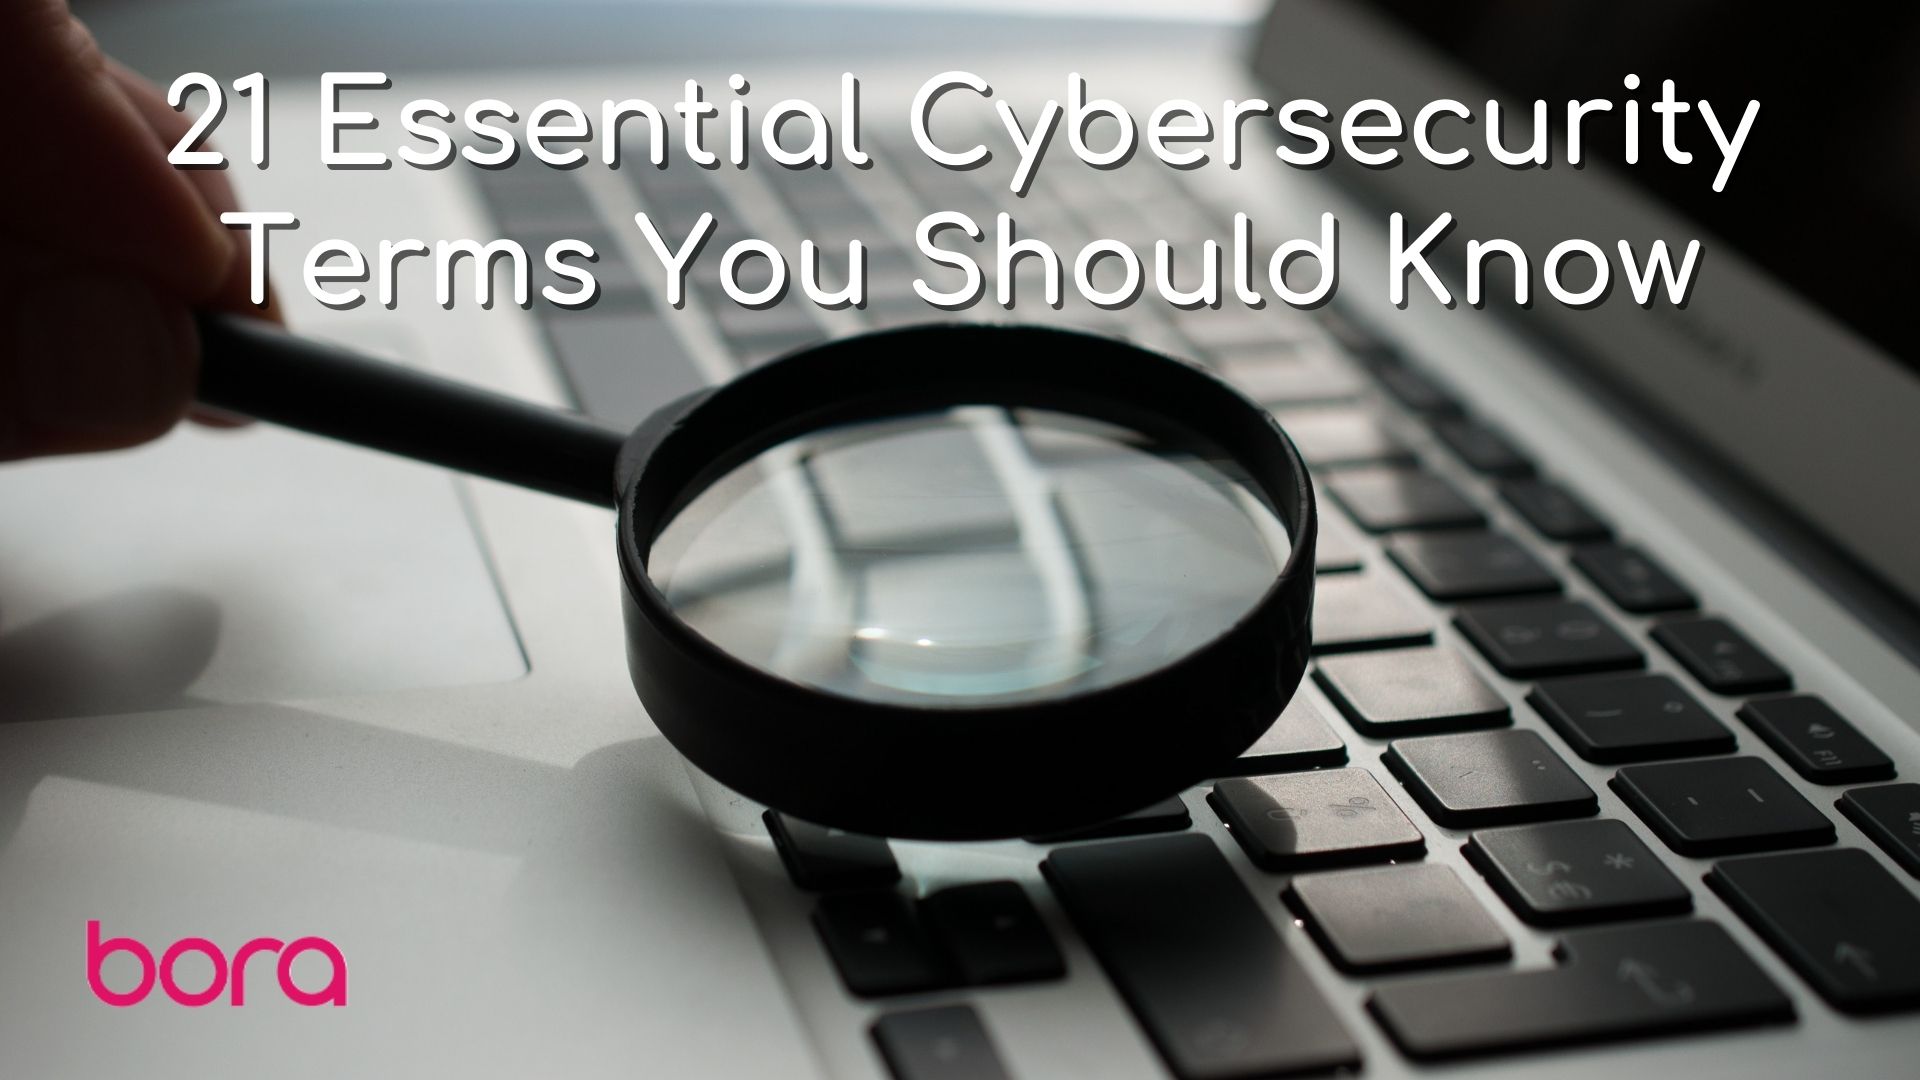 21 Essential Cybersecurity Terms You Should Know